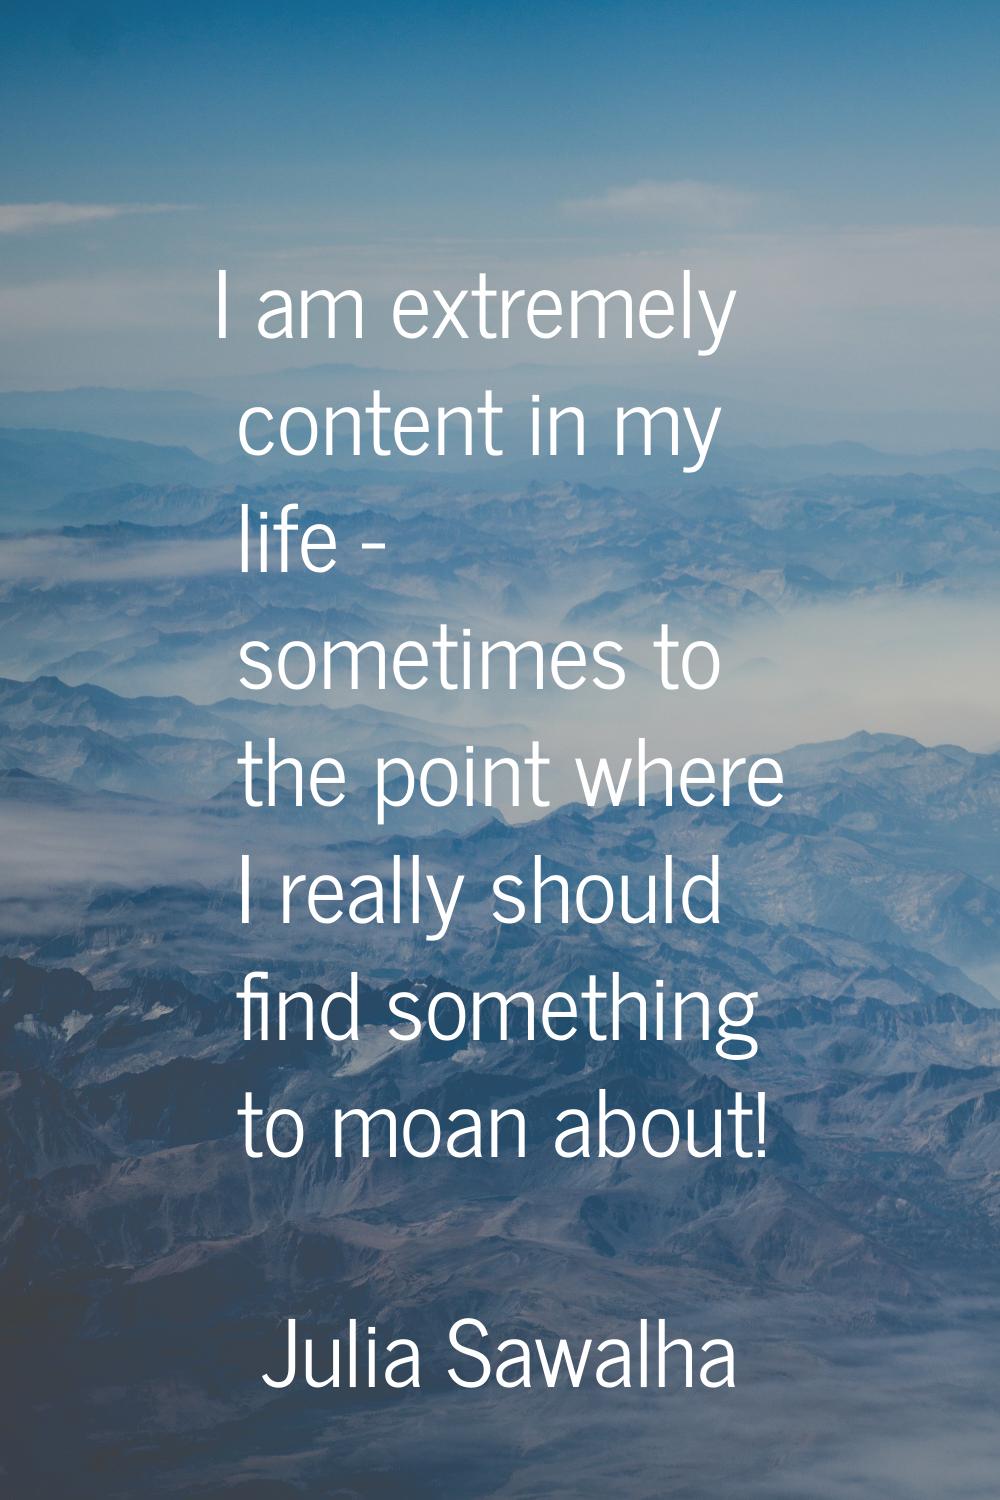 I am extremely content in my life - sometimes to the point where I really should find something to 